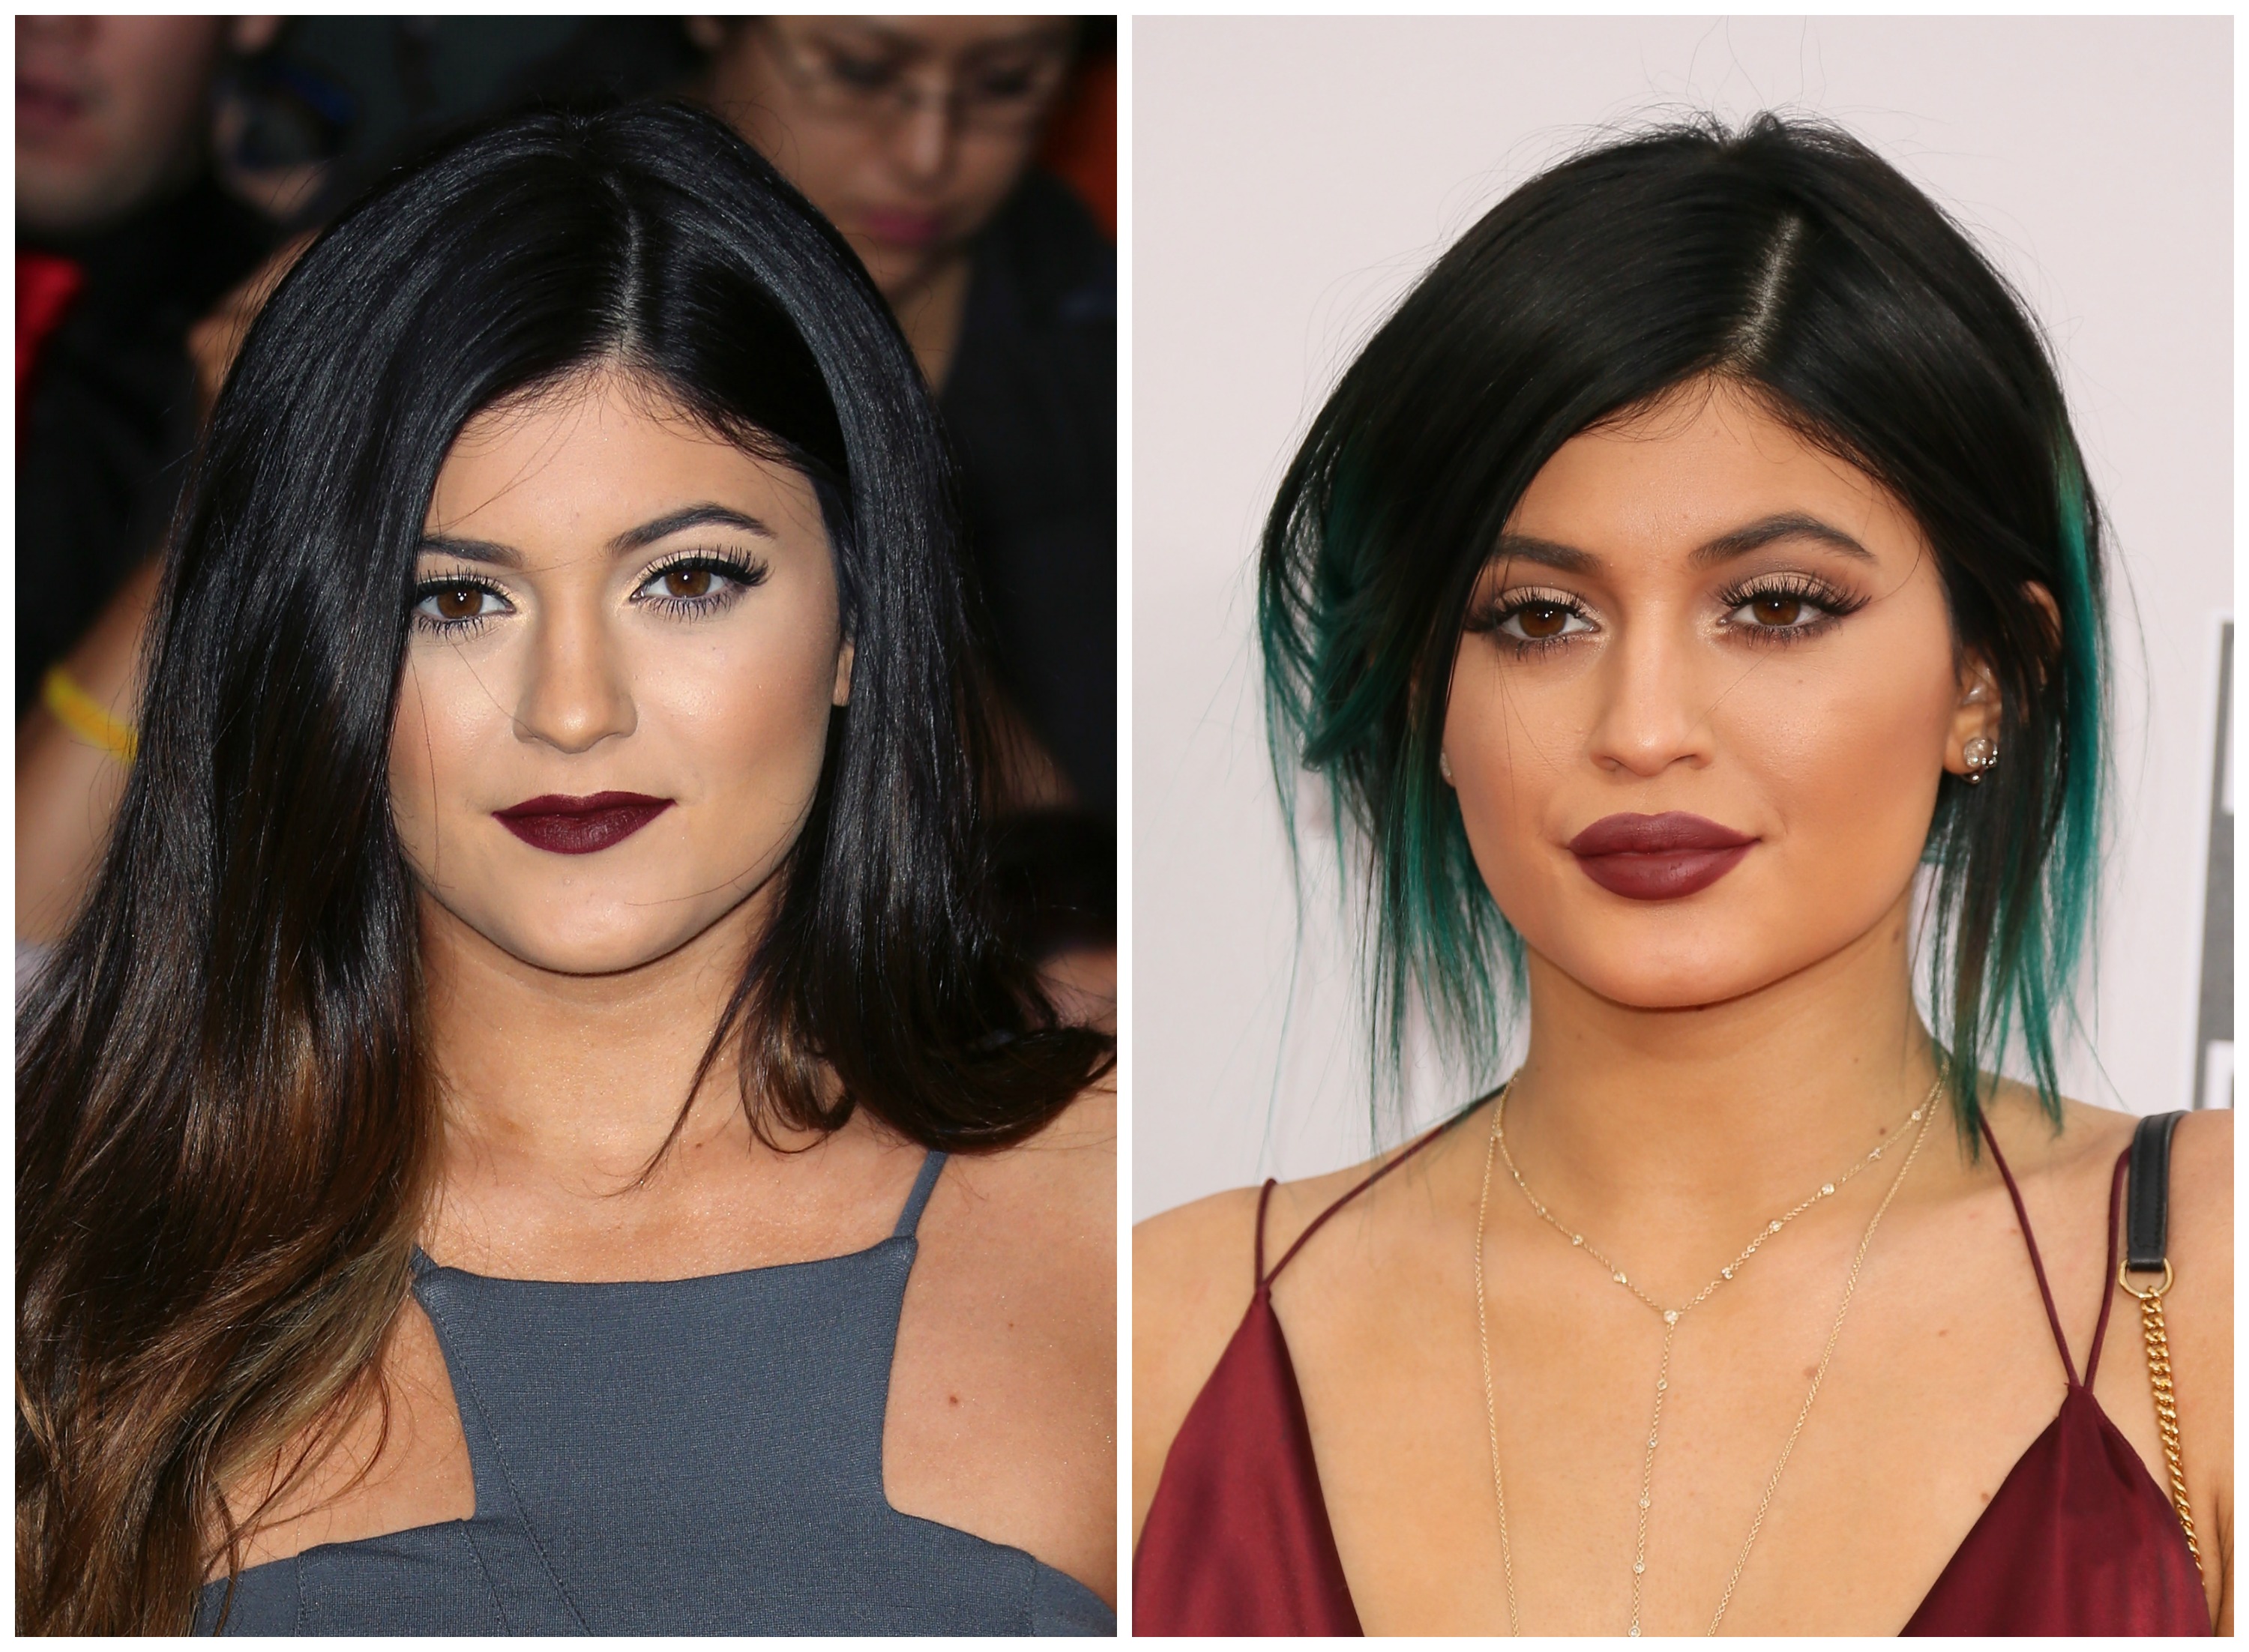 Celebs Who Admitted They Got Plastic Surgery: Kylie Jenner, Ronnie Ortiz-Magro, Ariel Winter, Courteney Cox, Vicki Gunvalson,